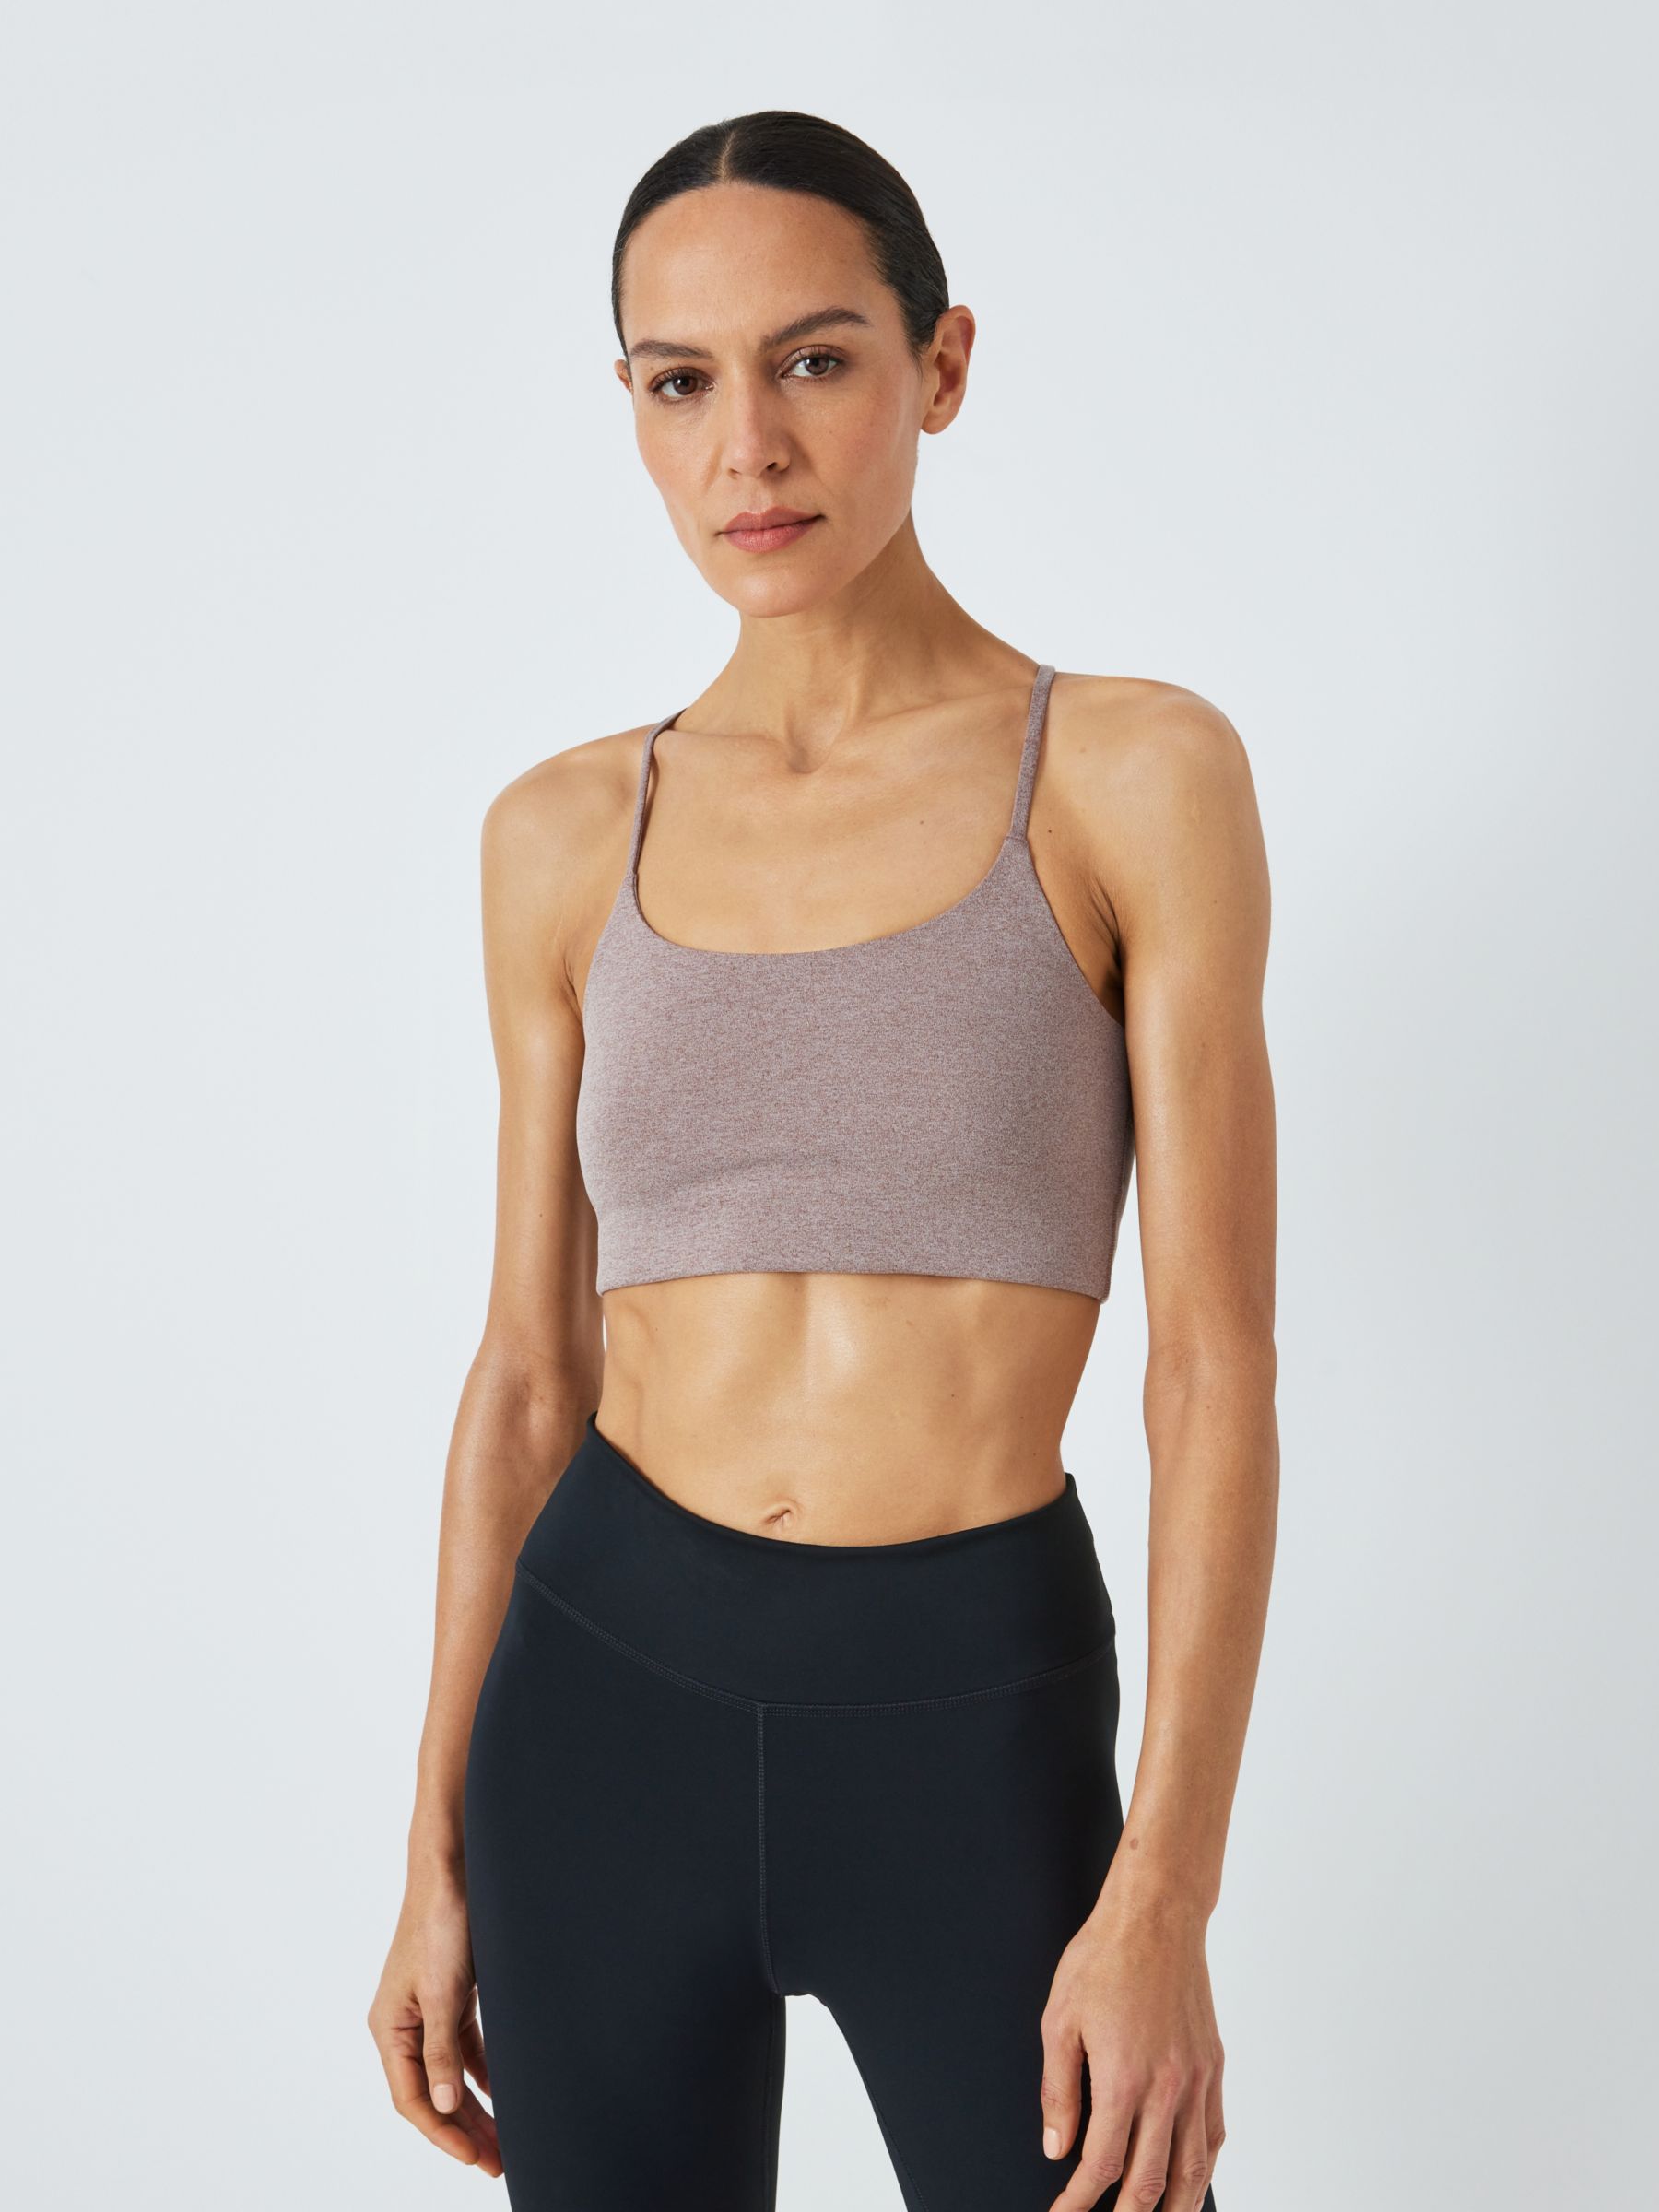 Pink Tommy Sport Bra by Girlfriend Collective on Sale